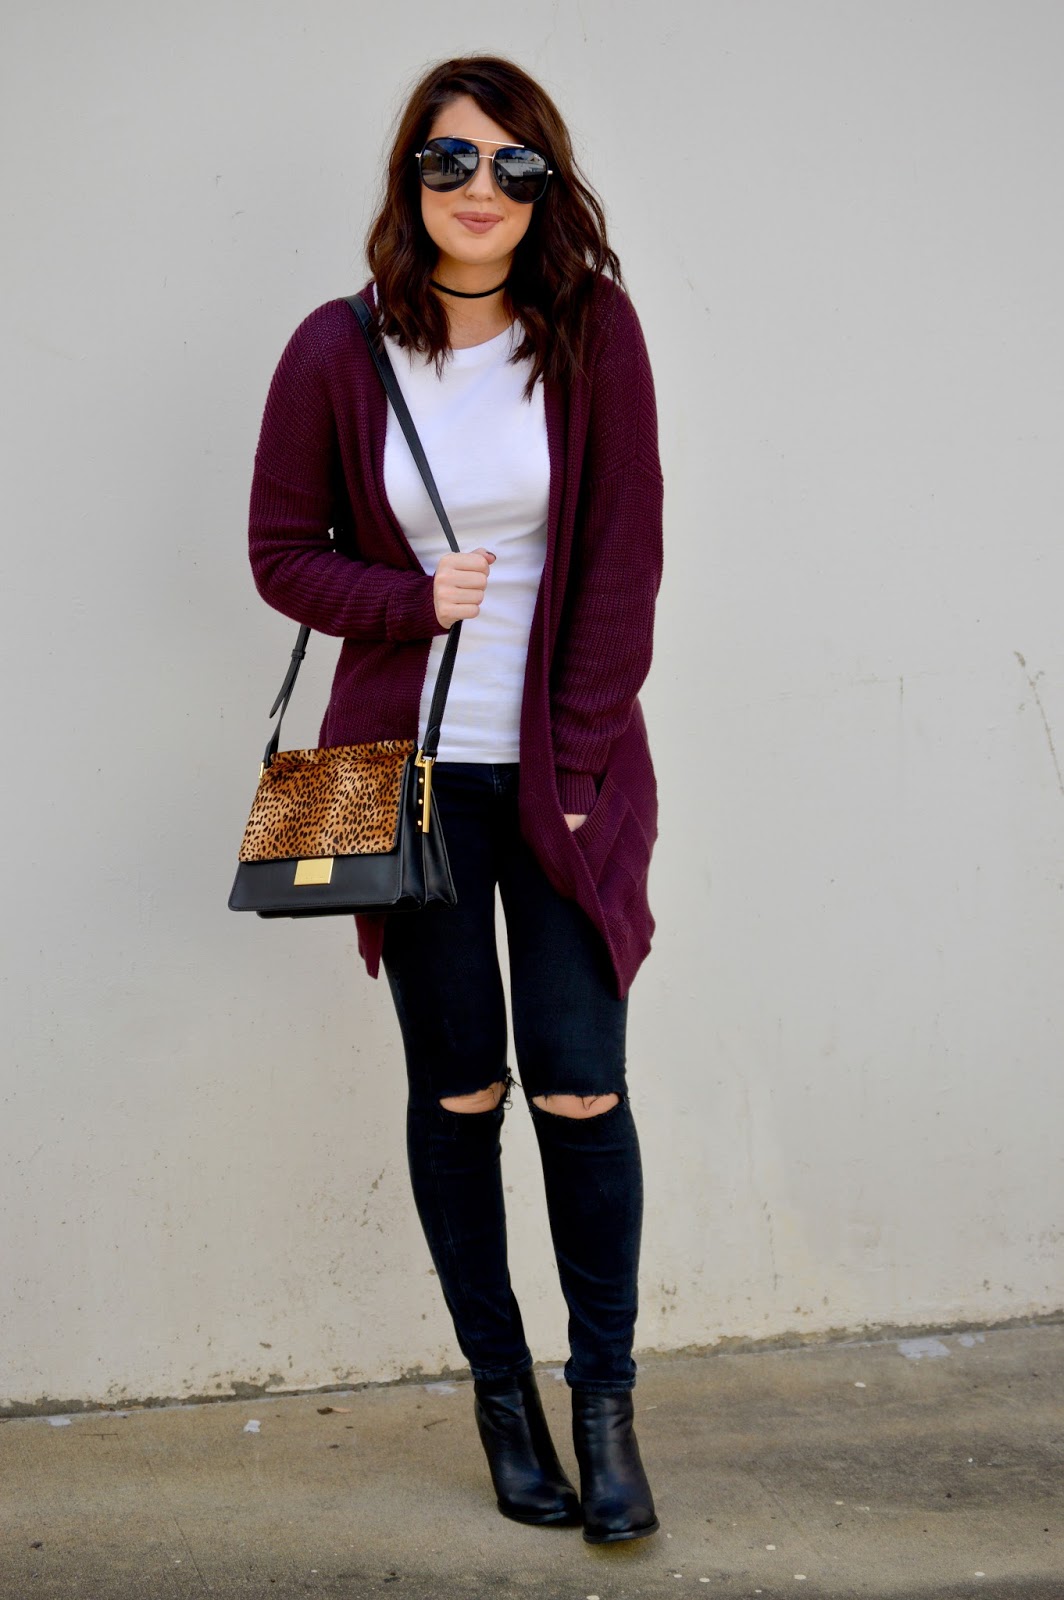 Rosy Outlook: Perfect Fall Cardi + Fashion Frenzy Link-Up!